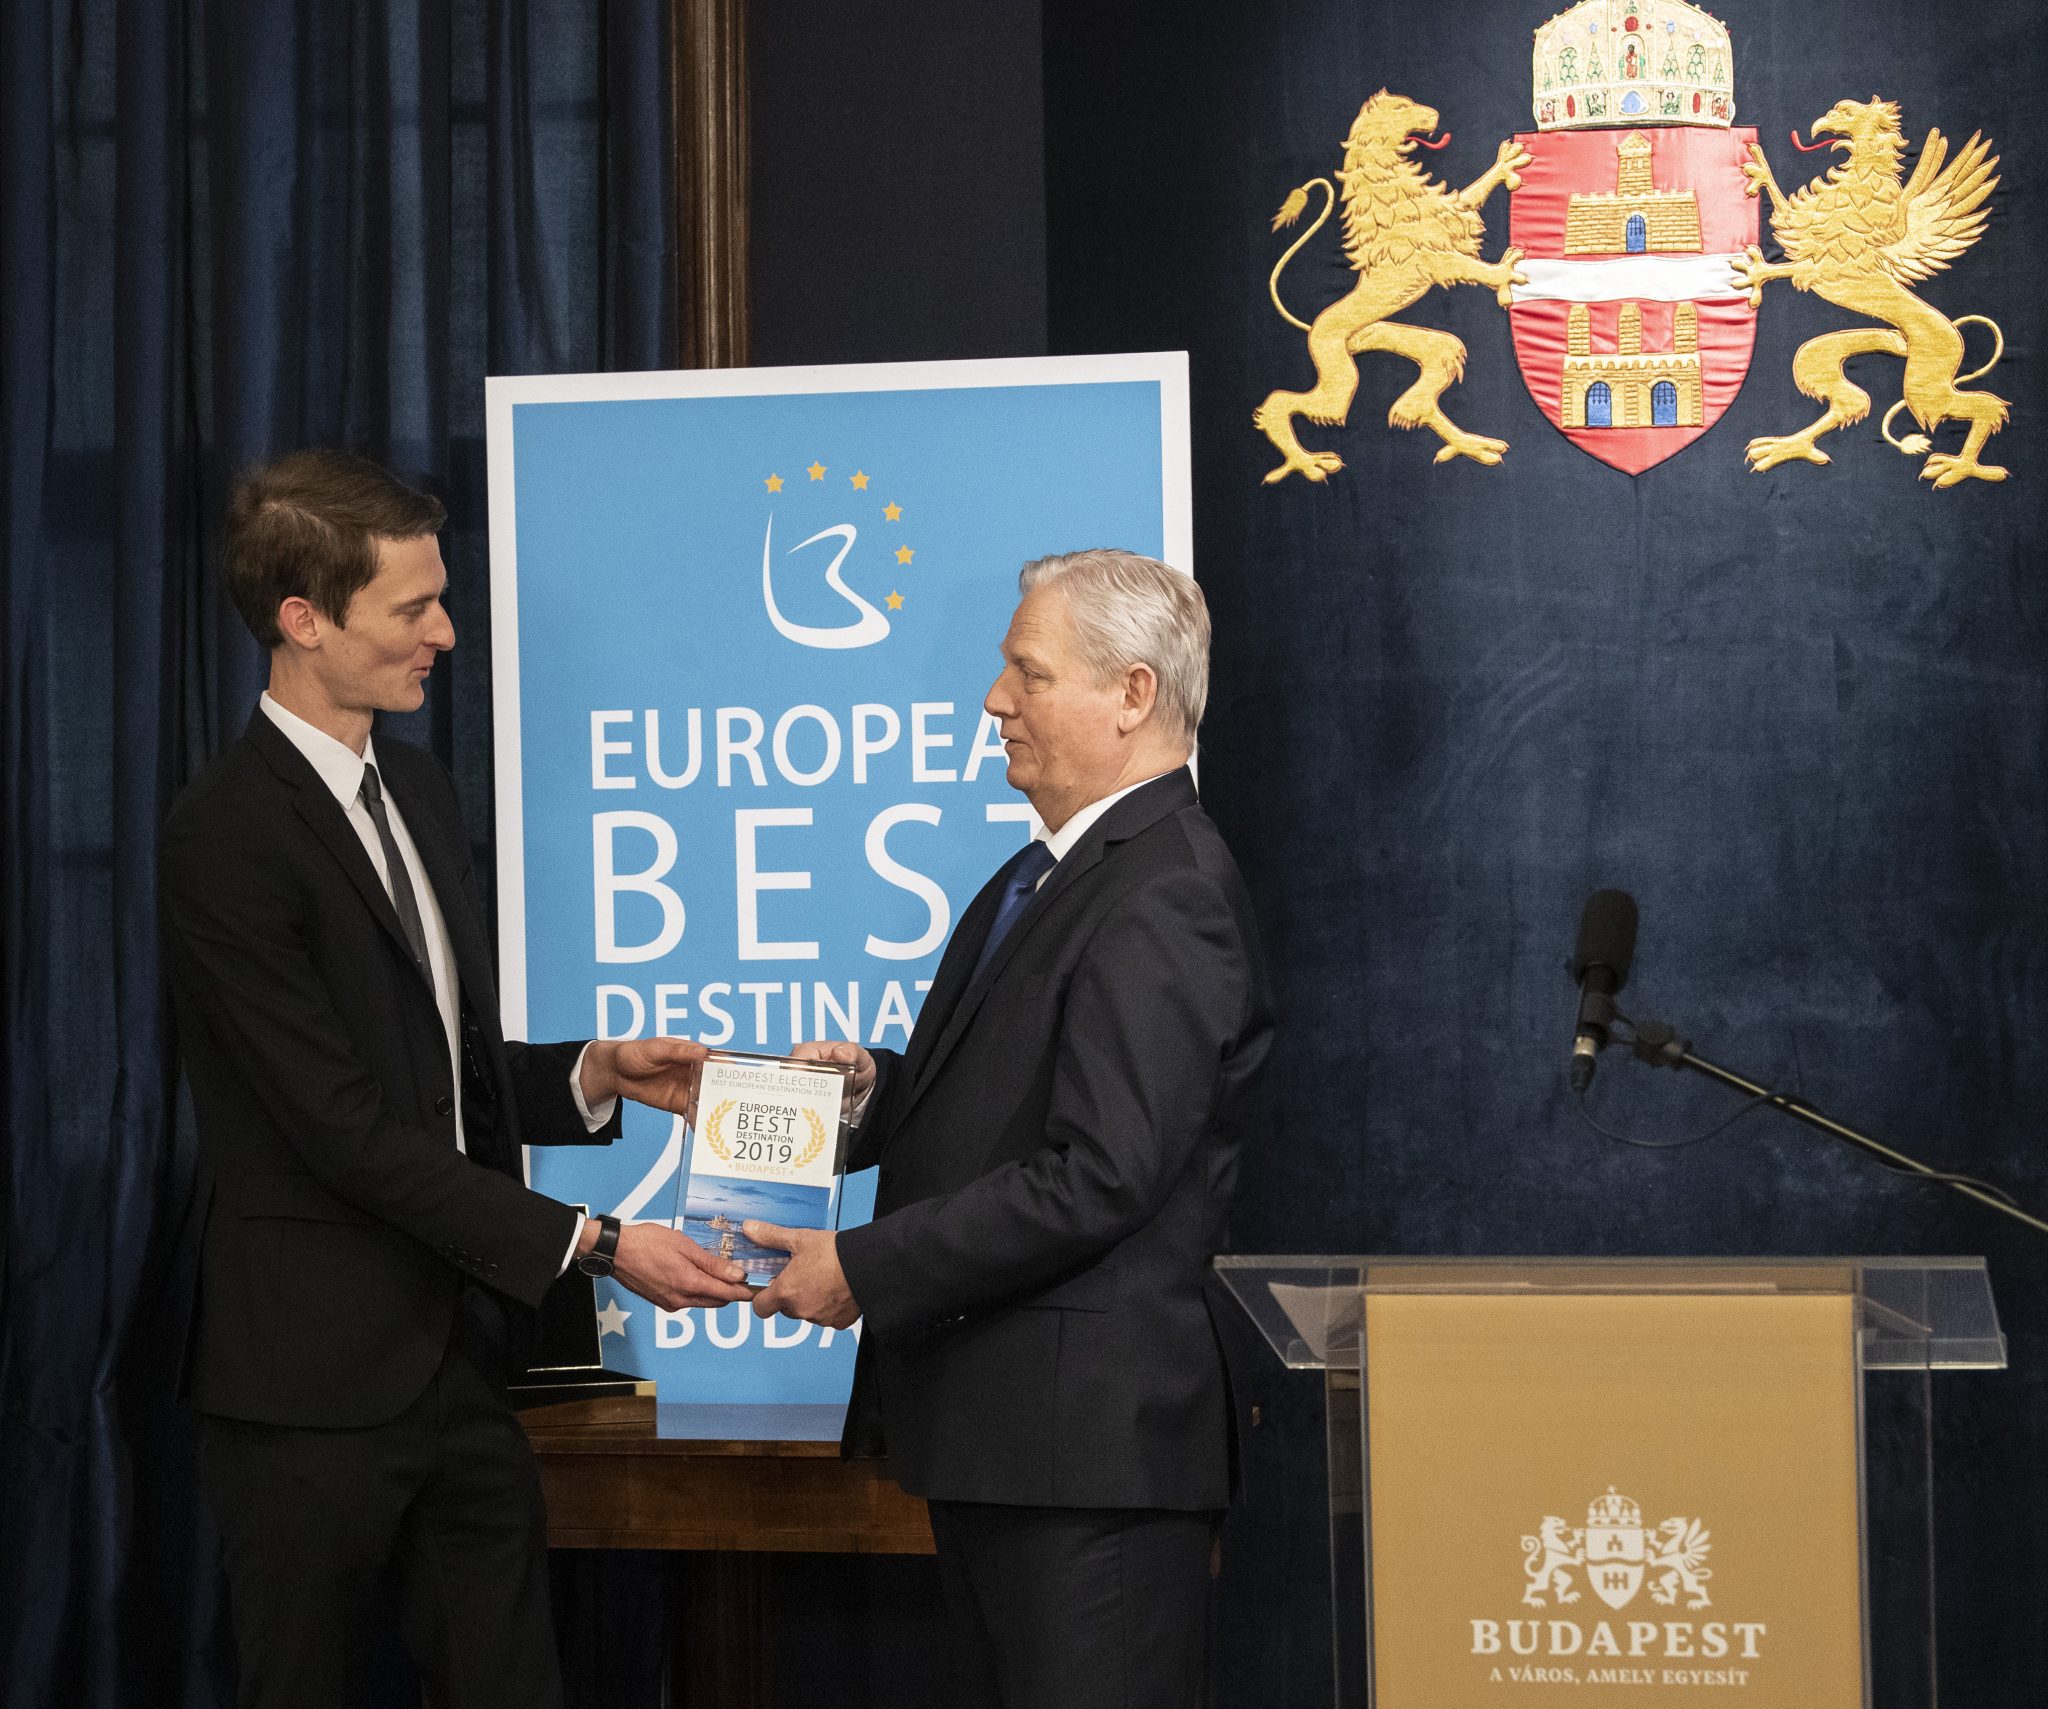 Budapest Mayor István Tarlós received the European Best Destination 2019 Award, granted to Budapest earlier this year, from Maximilien Lejeune, head of the European Best Destination (EBD) agency.